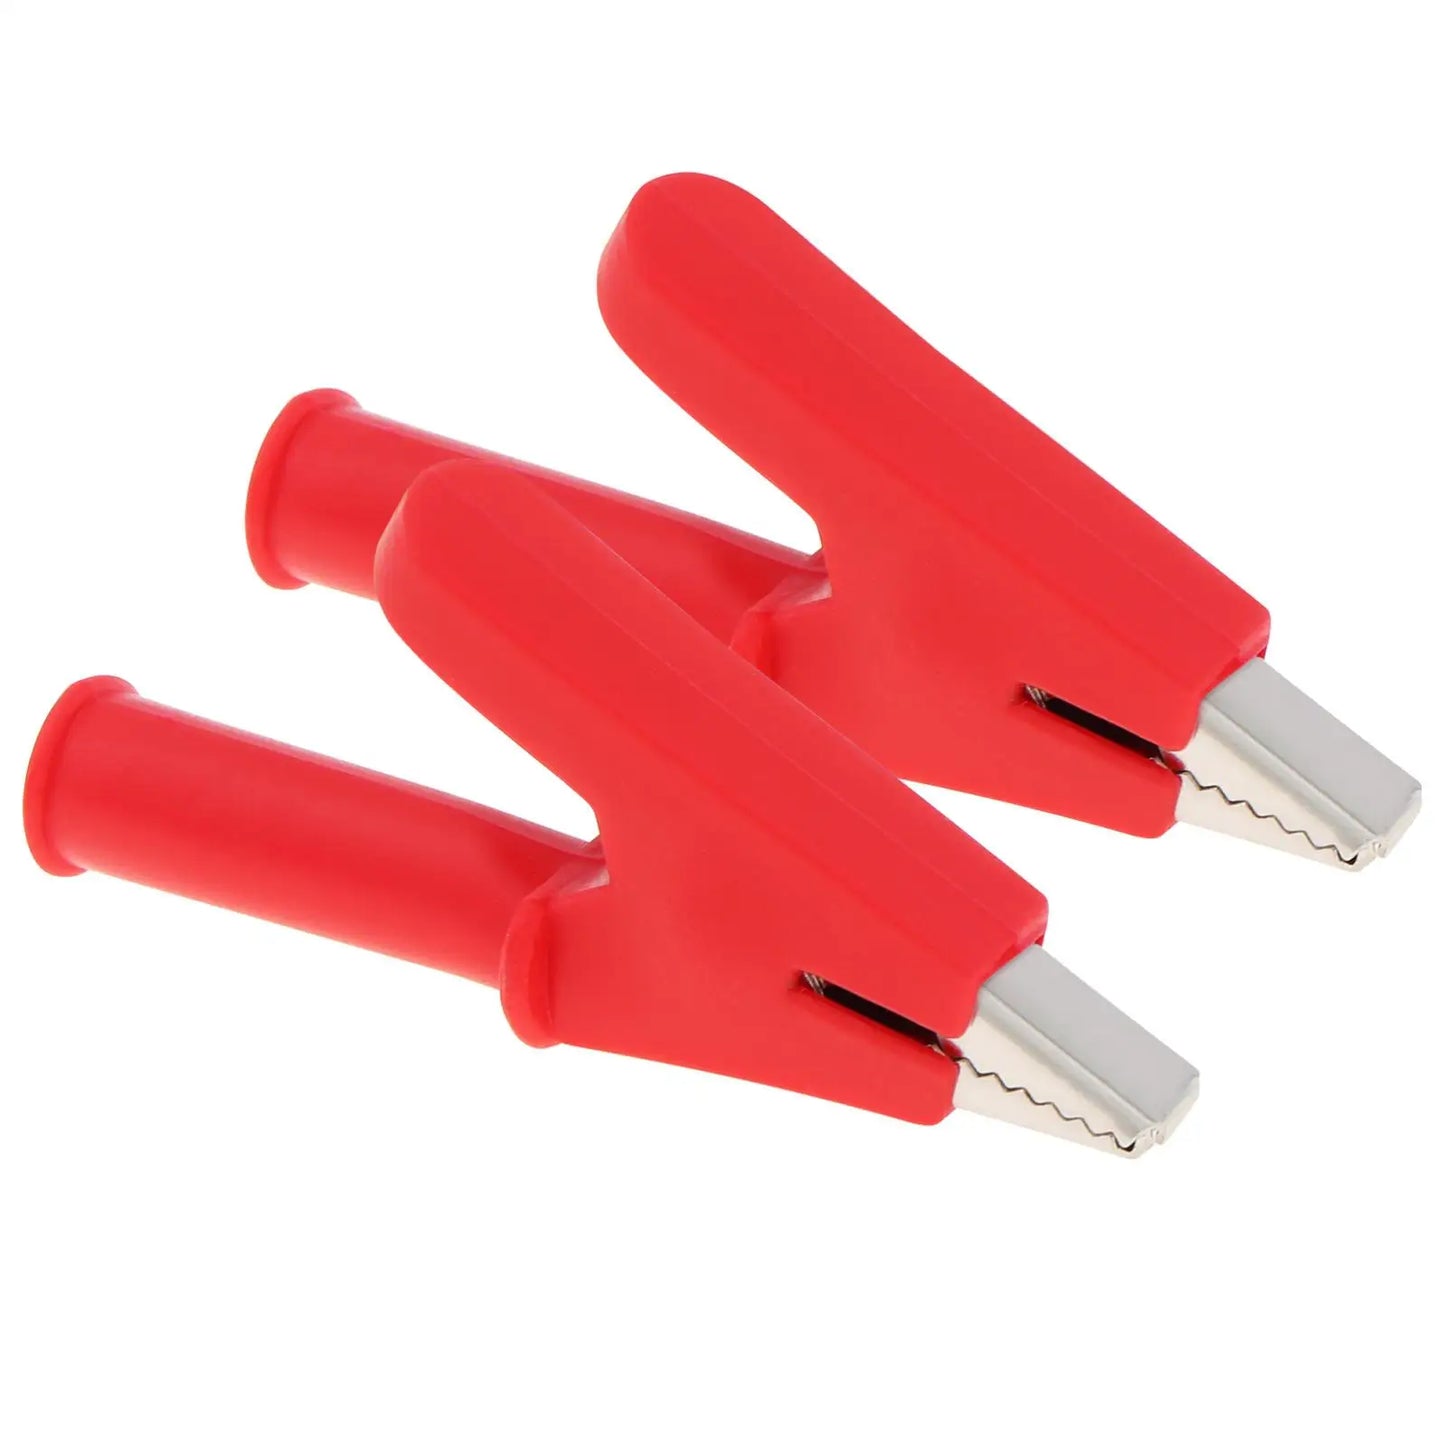 Alligator clip 10pcs Fully Insulated Crocodile Alligator Clip with Open 10mm Test Clamp Wire Clip